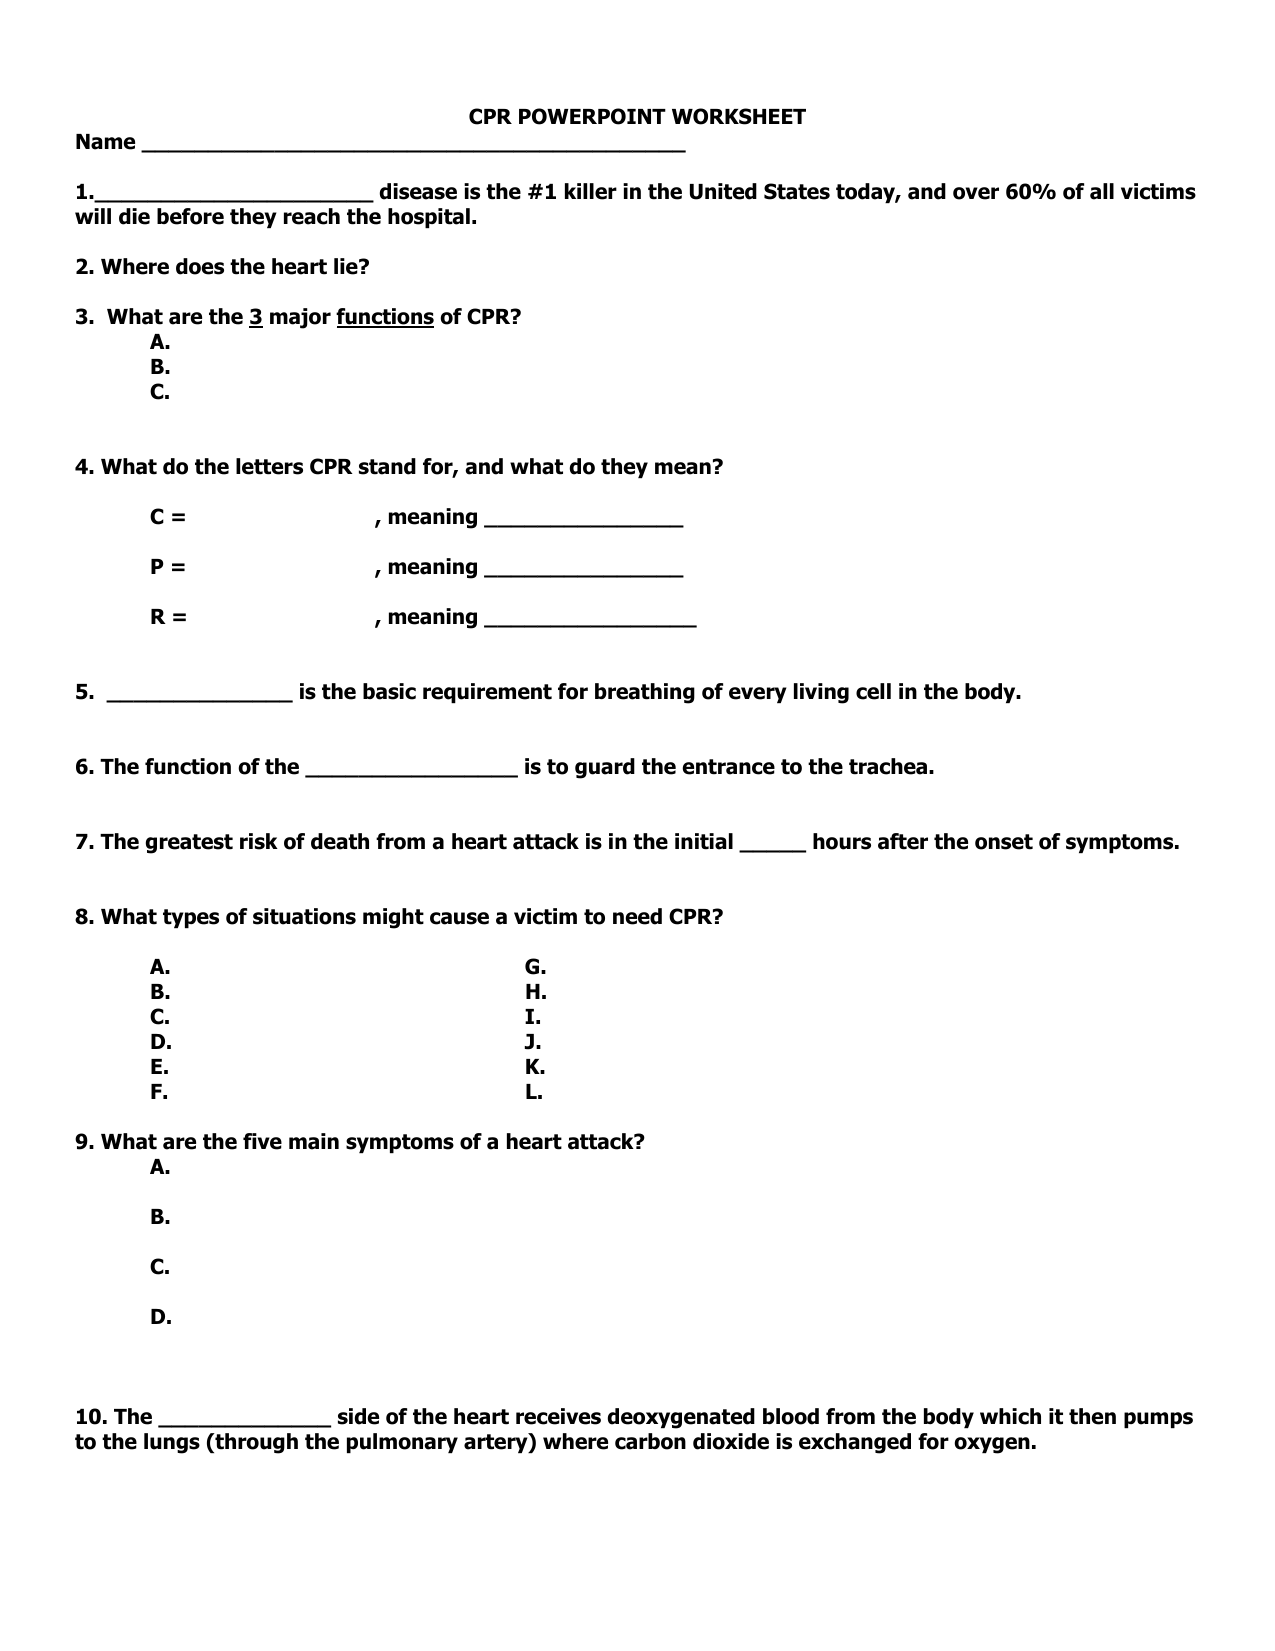 cpr-worksheet-answer-key-promotiontablecovers